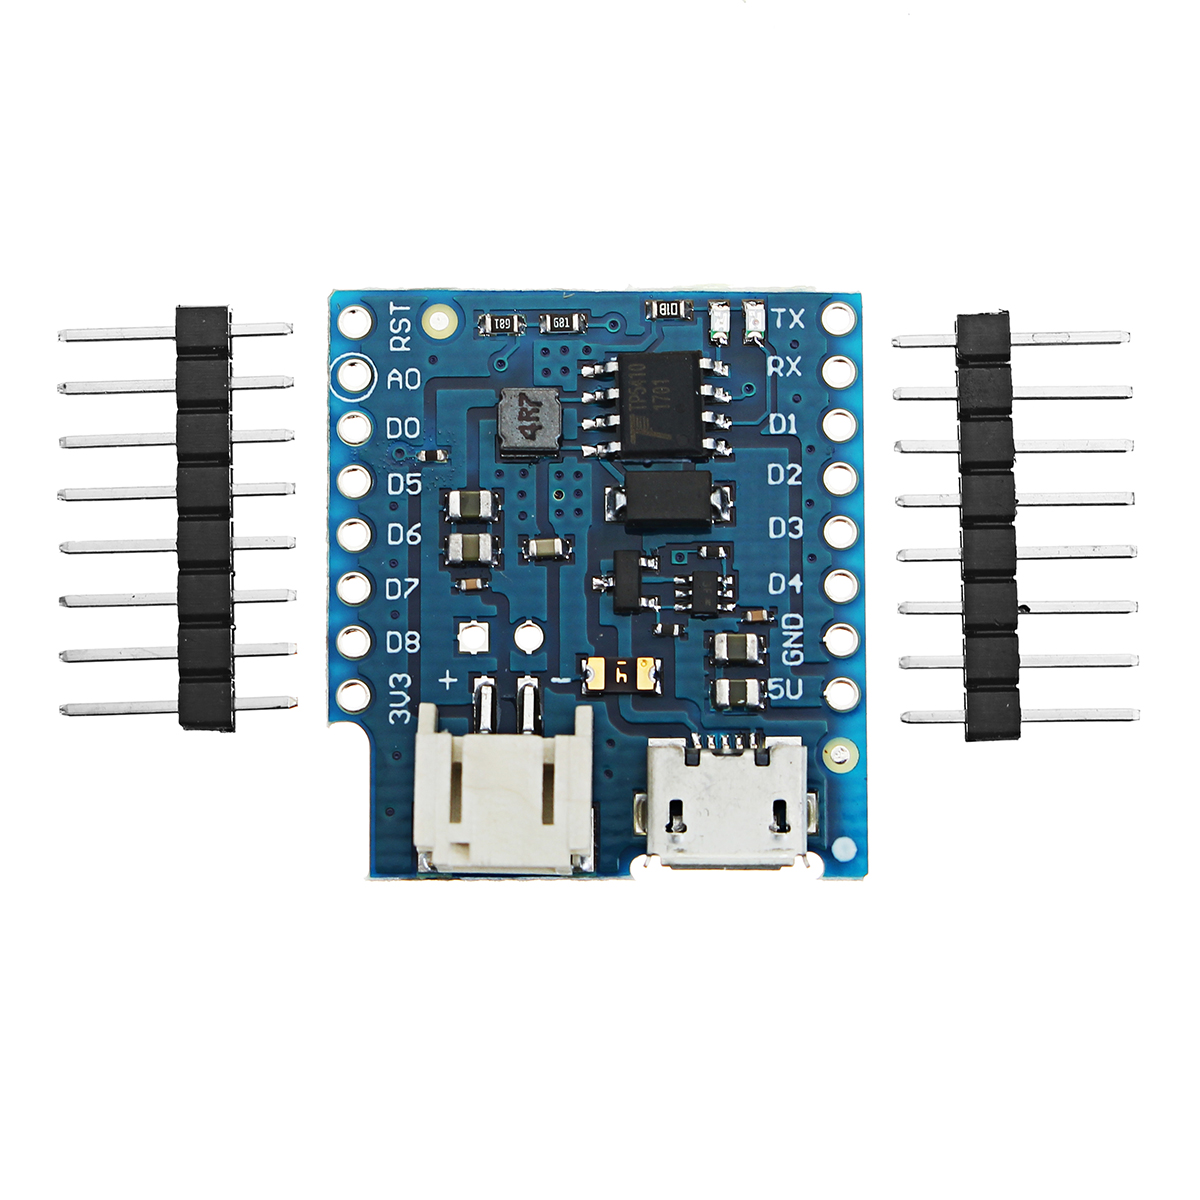 

Battery Shield V1.2.0 Expansion Board For D1 Mini Single Lithium Battery Charging & Boost